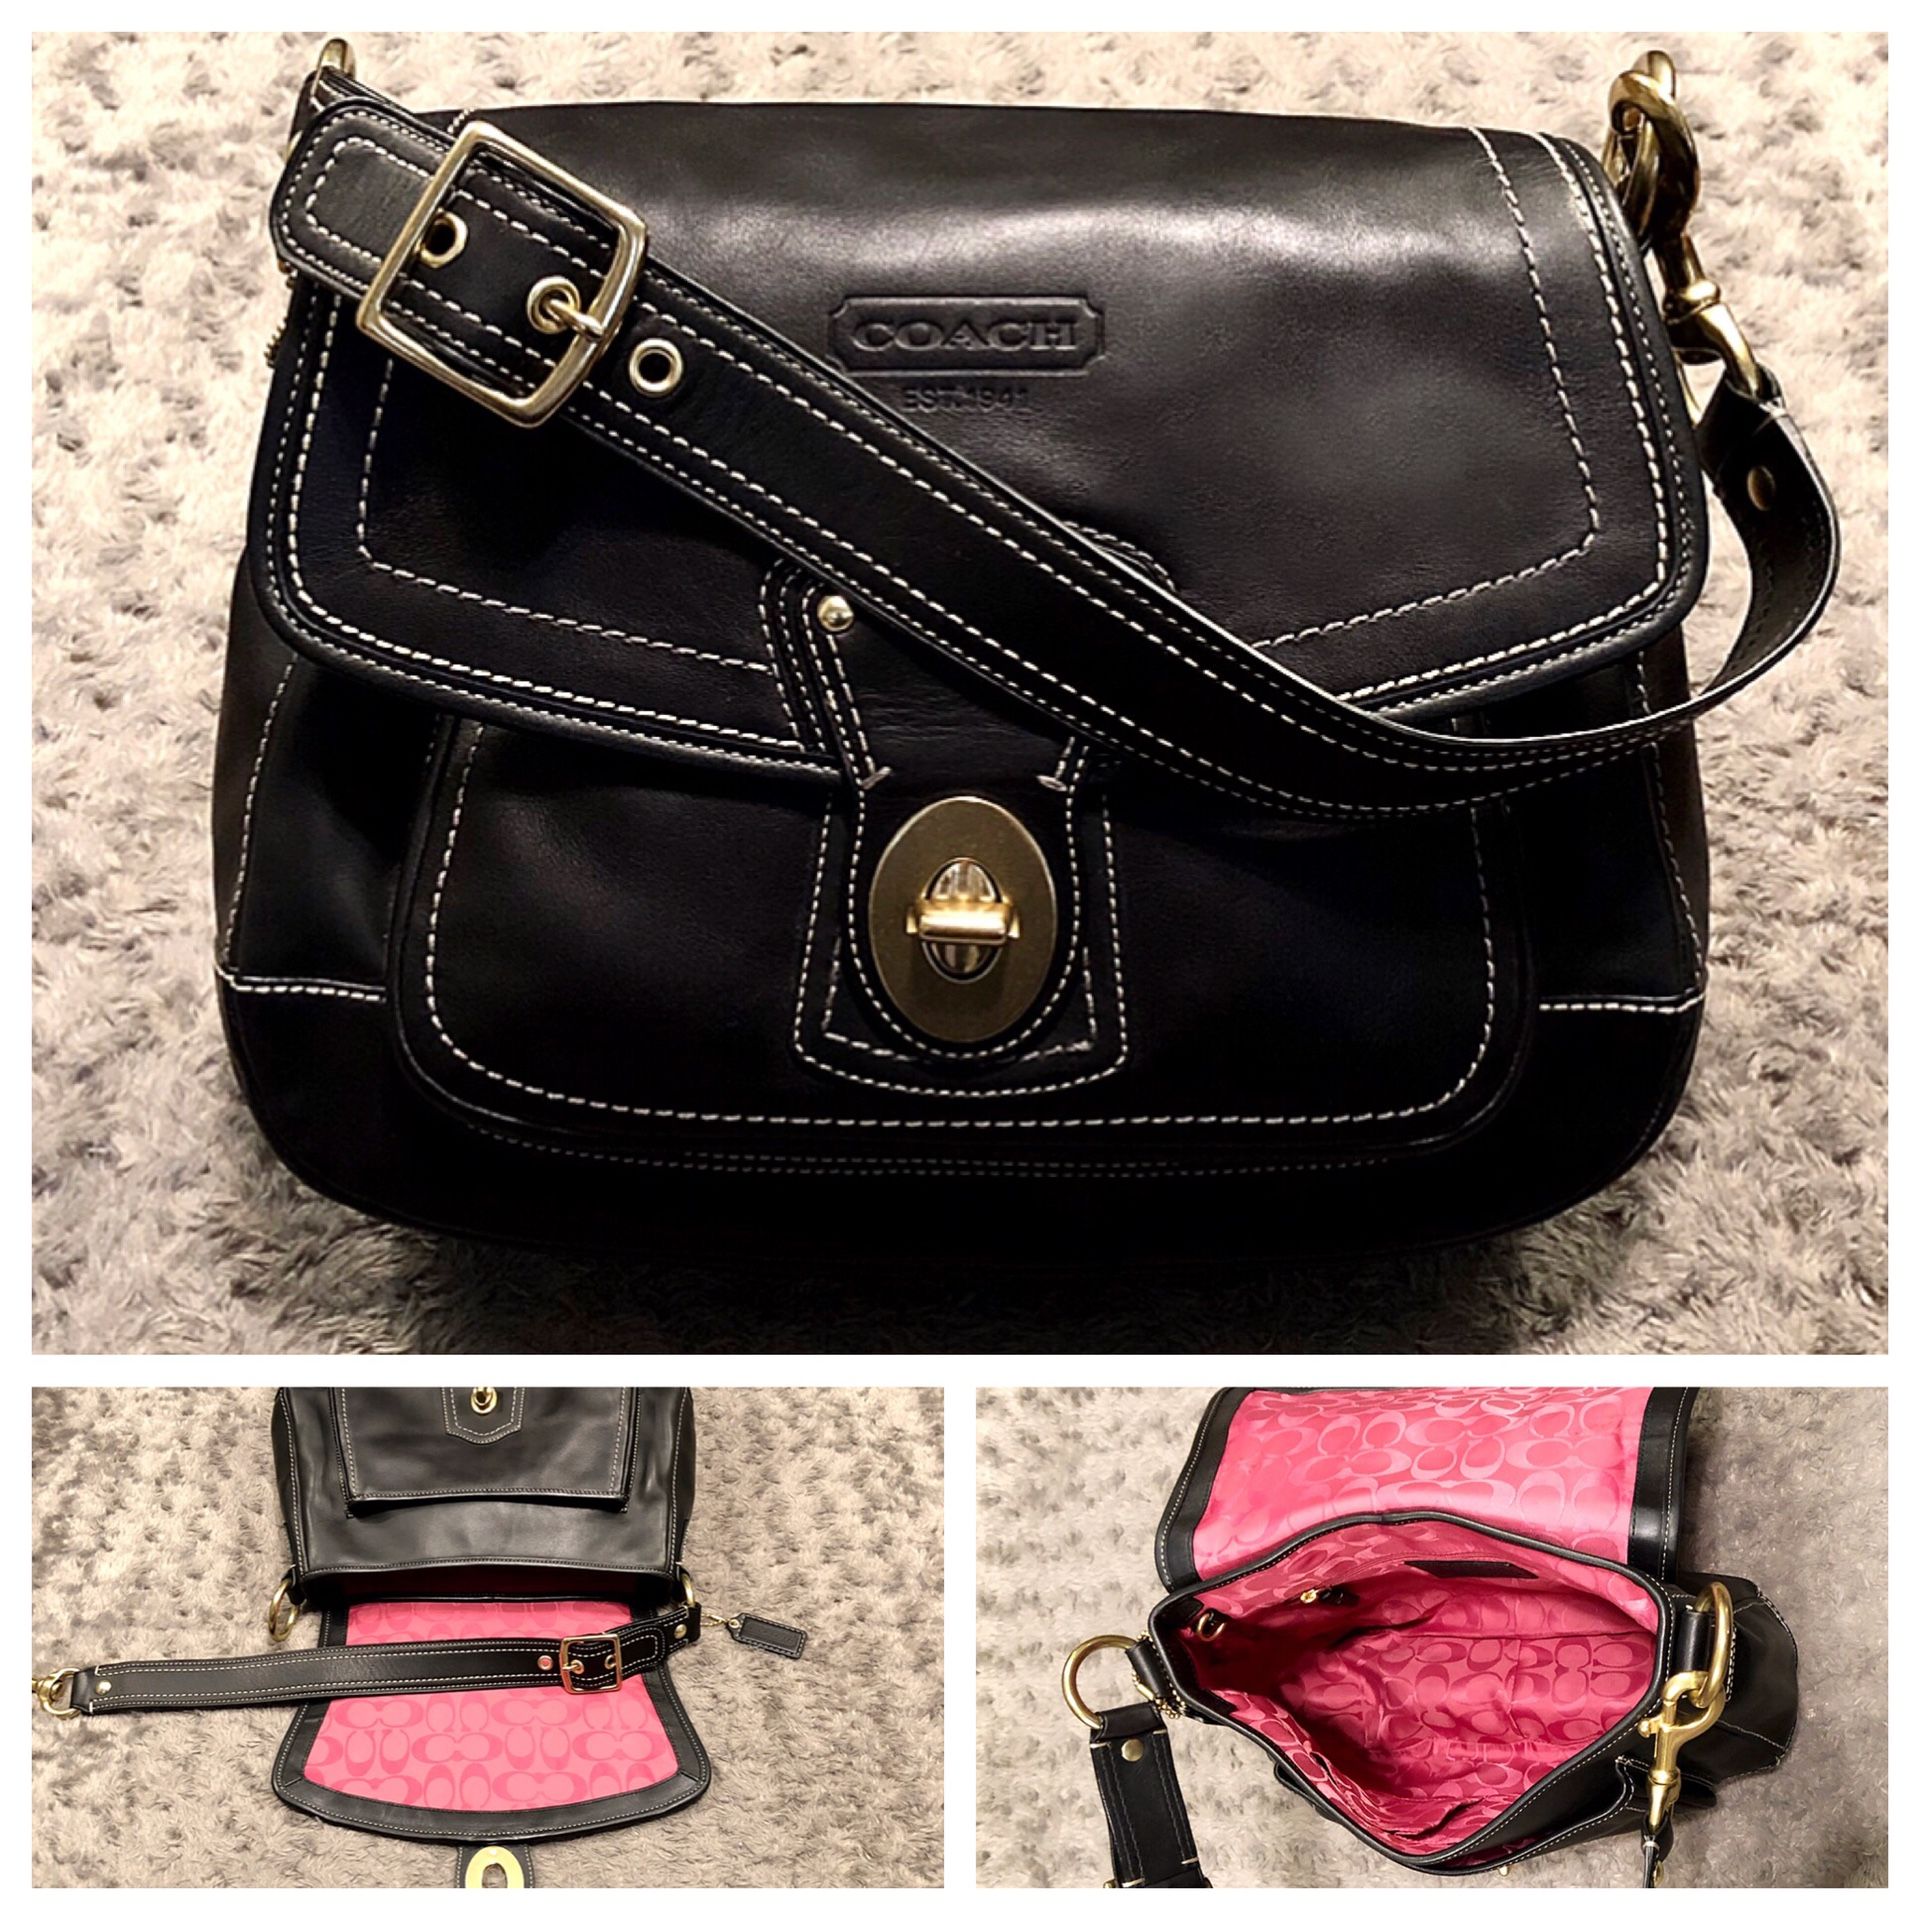 Coach Legacy Ali hobo Bag 65th paid $418 Like new! Excellent condition no signs of wear! Anniversary Legacy Ali Bag #G0869-F12854 Leather Black Antiq